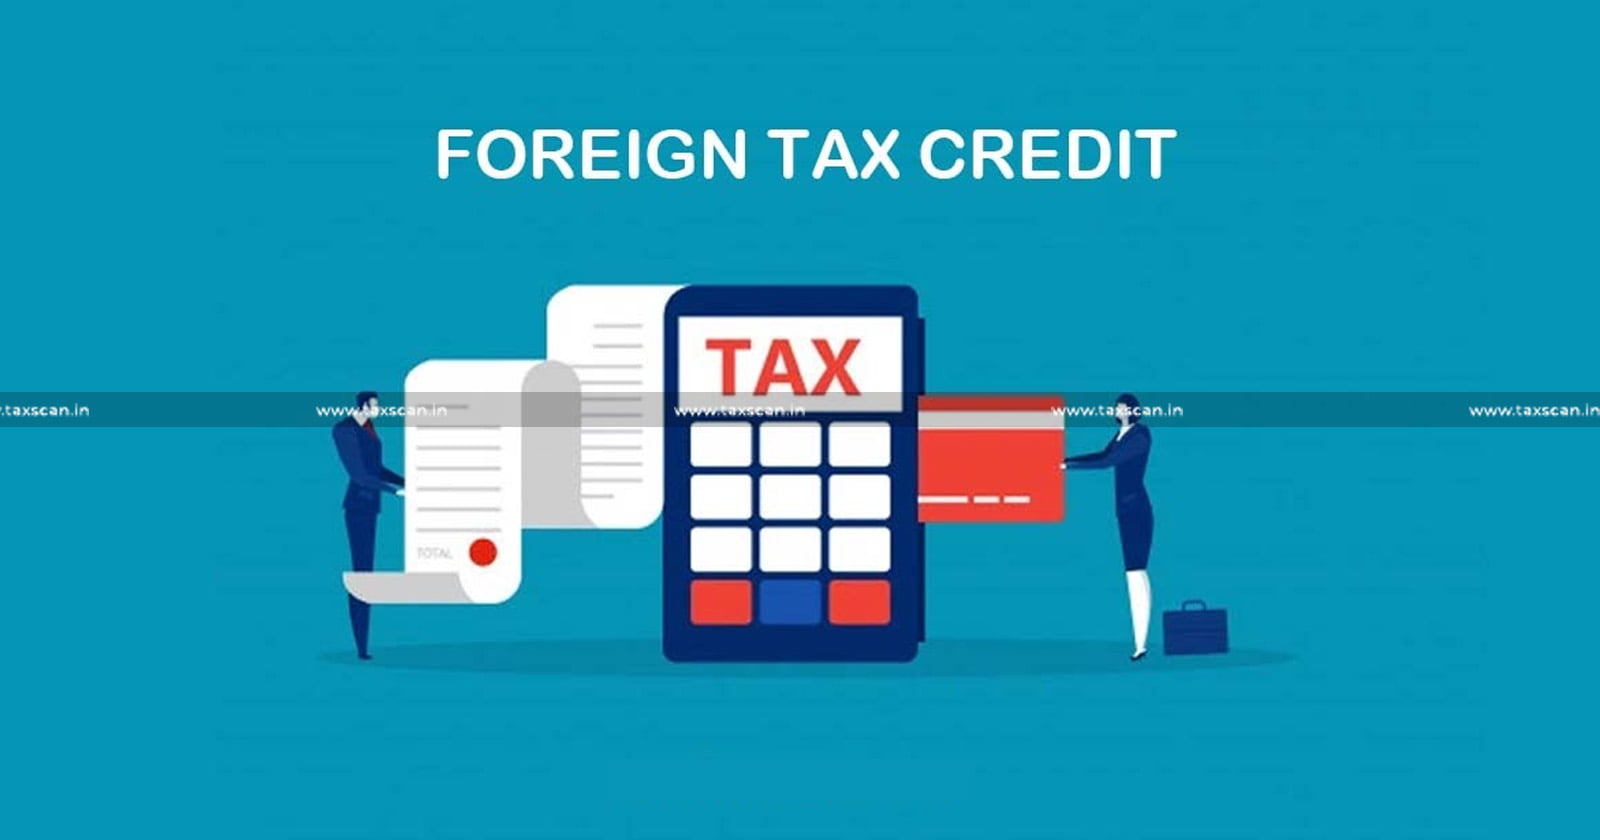 Foreign Tax Credit - Foreign Tax - Tax Credit - Filing Form 67 within Due Date of Return - Filing Form 67 - Due Date of Return - Due Date - Income Tax Act - Income Tax - ITAT - Taxscan